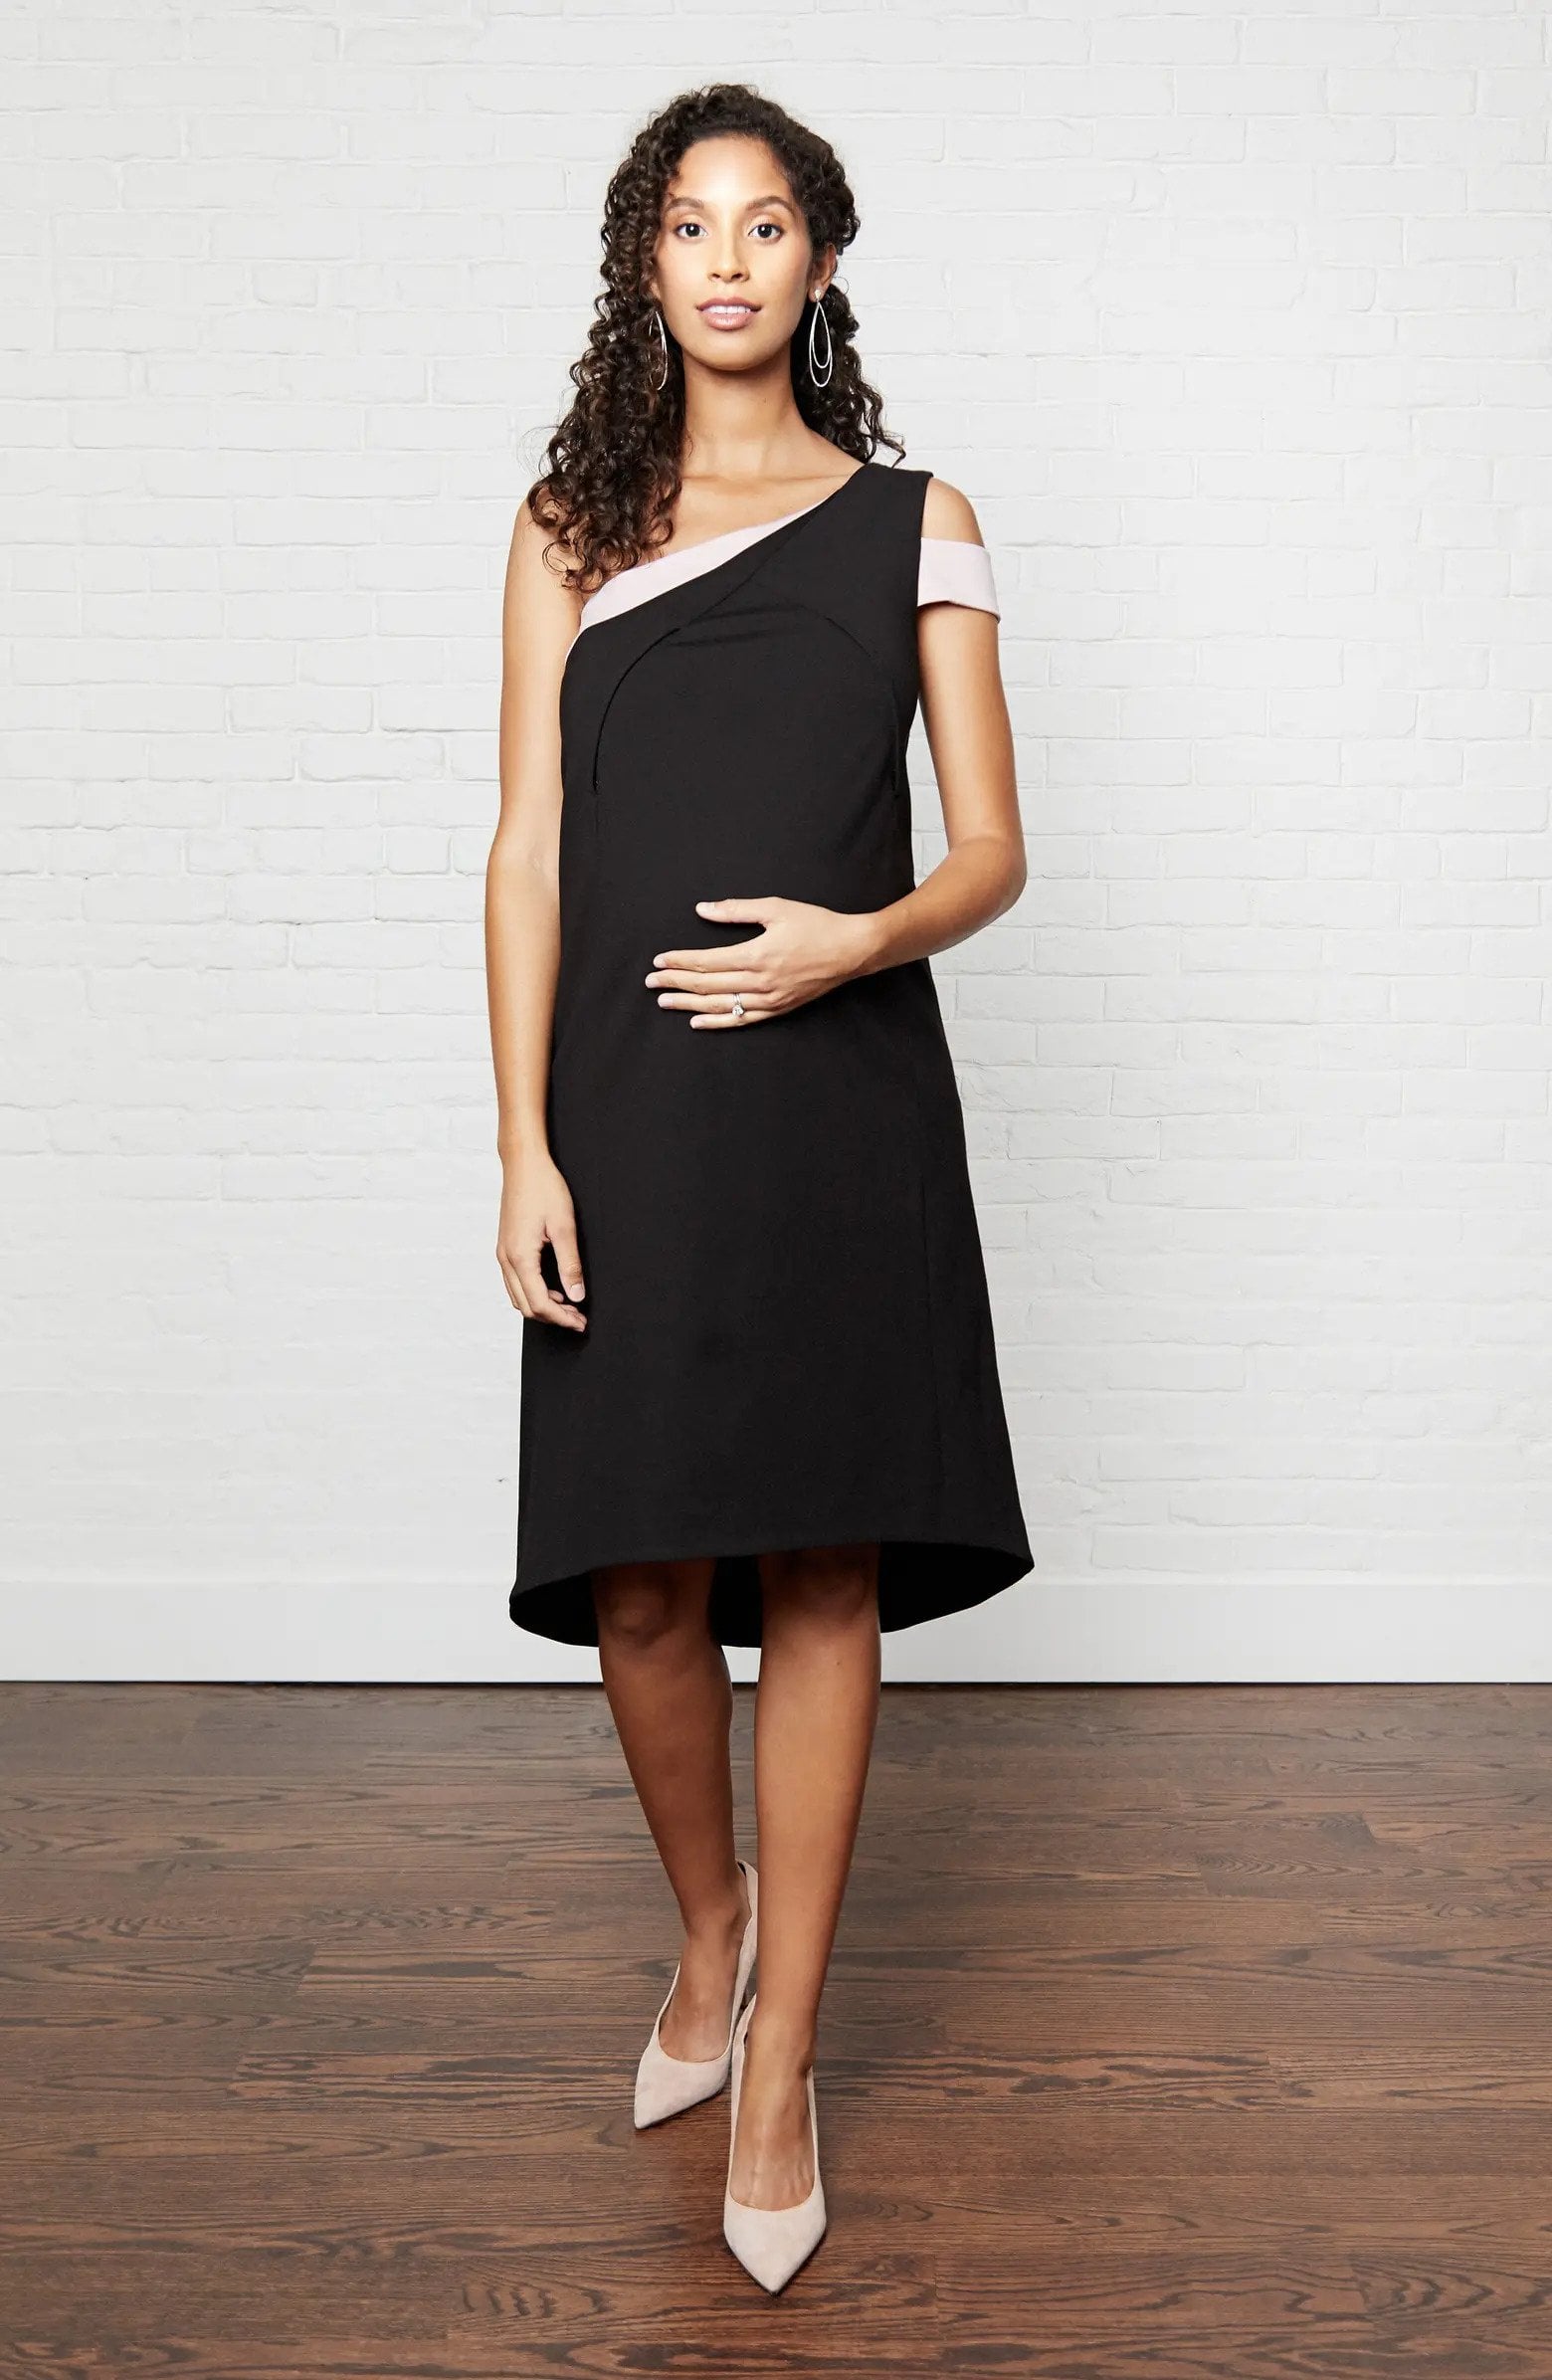 Find a Maternity Wedding Guest Dress From This List